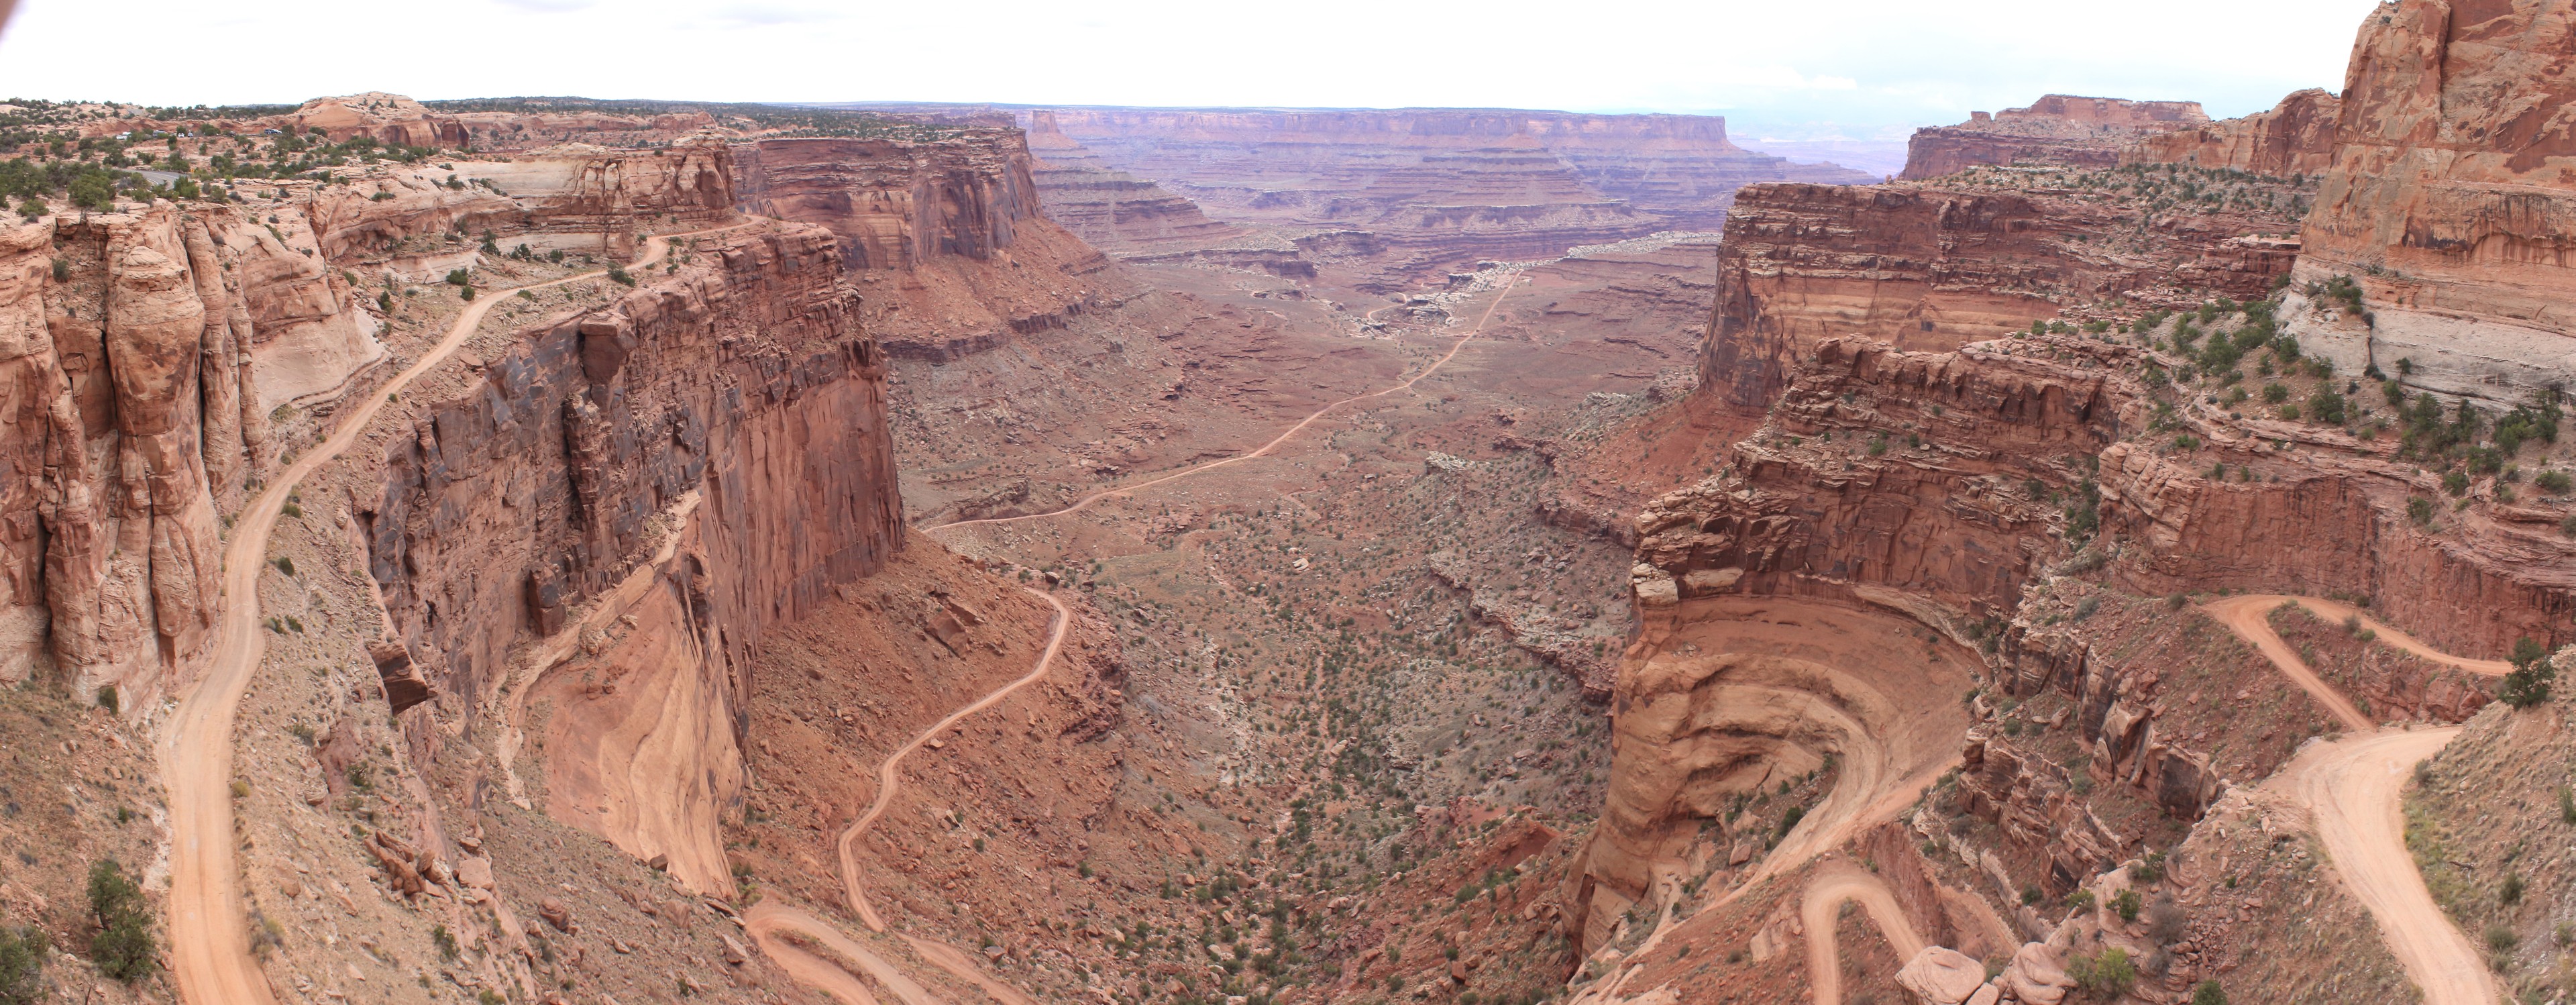 The Trail to the Colorado. Looking southeast from the 'Island in the Sky' mesa, this is the Jeep/Motorcycle trail leading to the Colorado Branch of the Canyonlands.